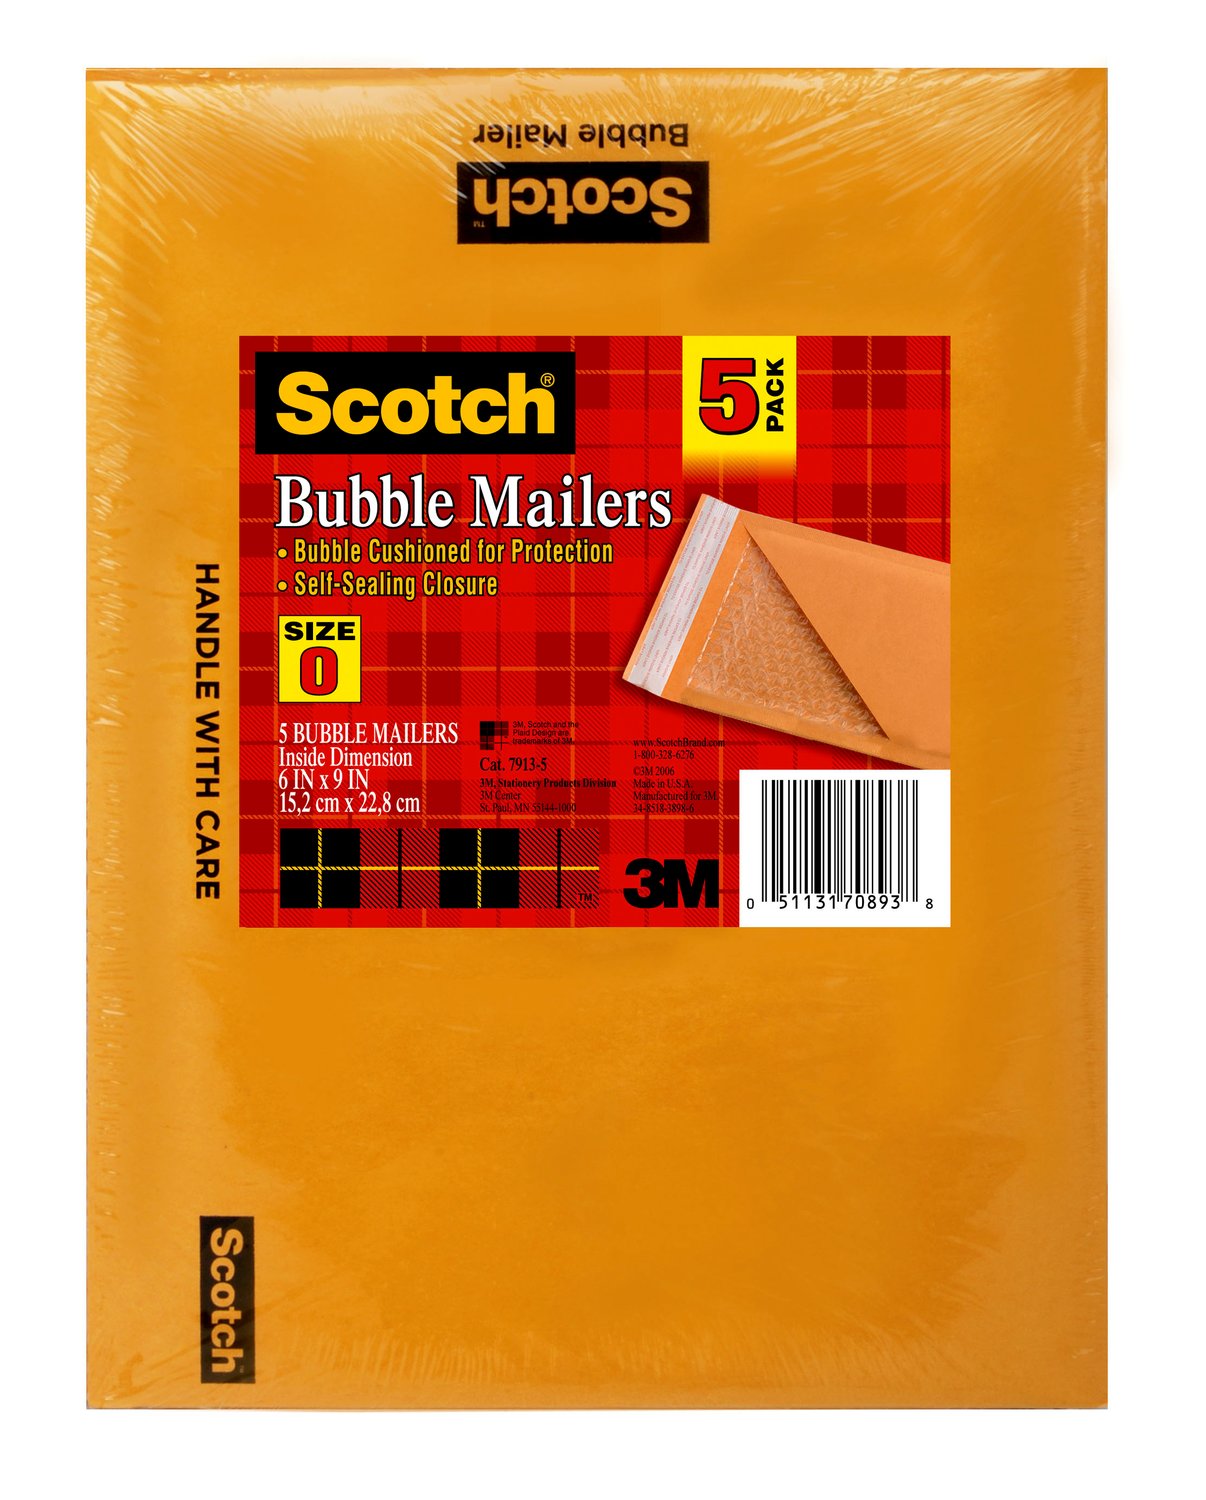 7010333464 - Scotch Kraft Bubble Mailer 5-Pack, 7913-5, 6 in x 9 in Size #0